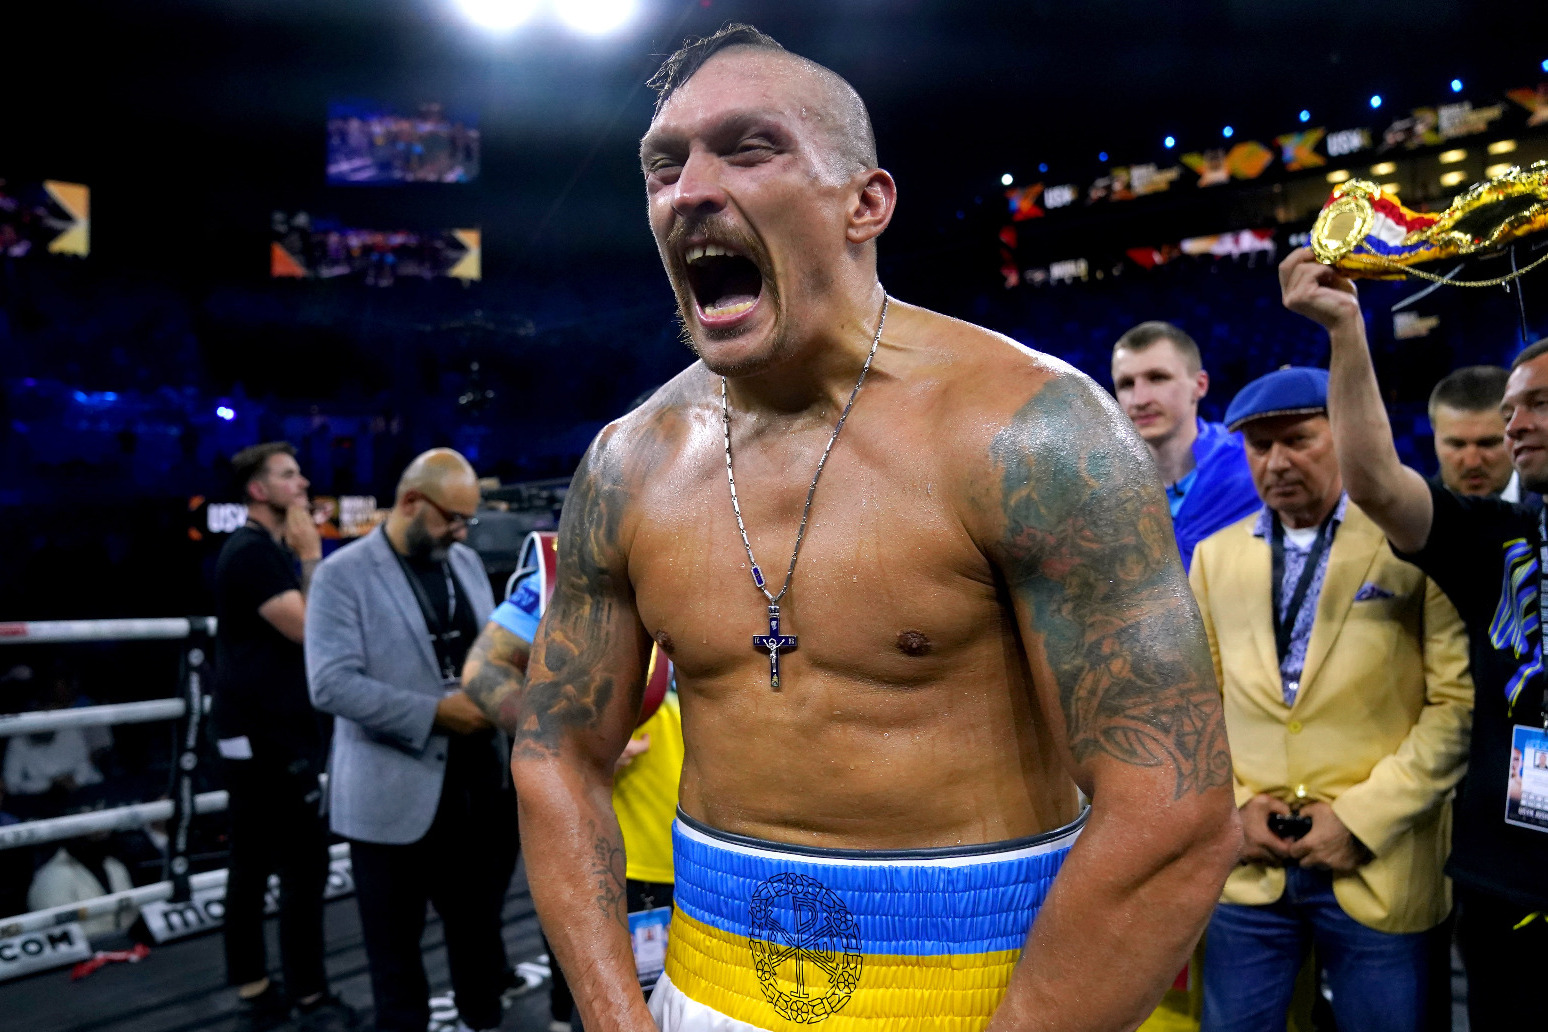 Oleksandr Usyk accepts Tyson Fury’s 70-30 offer – but asks for Ukraine donation 